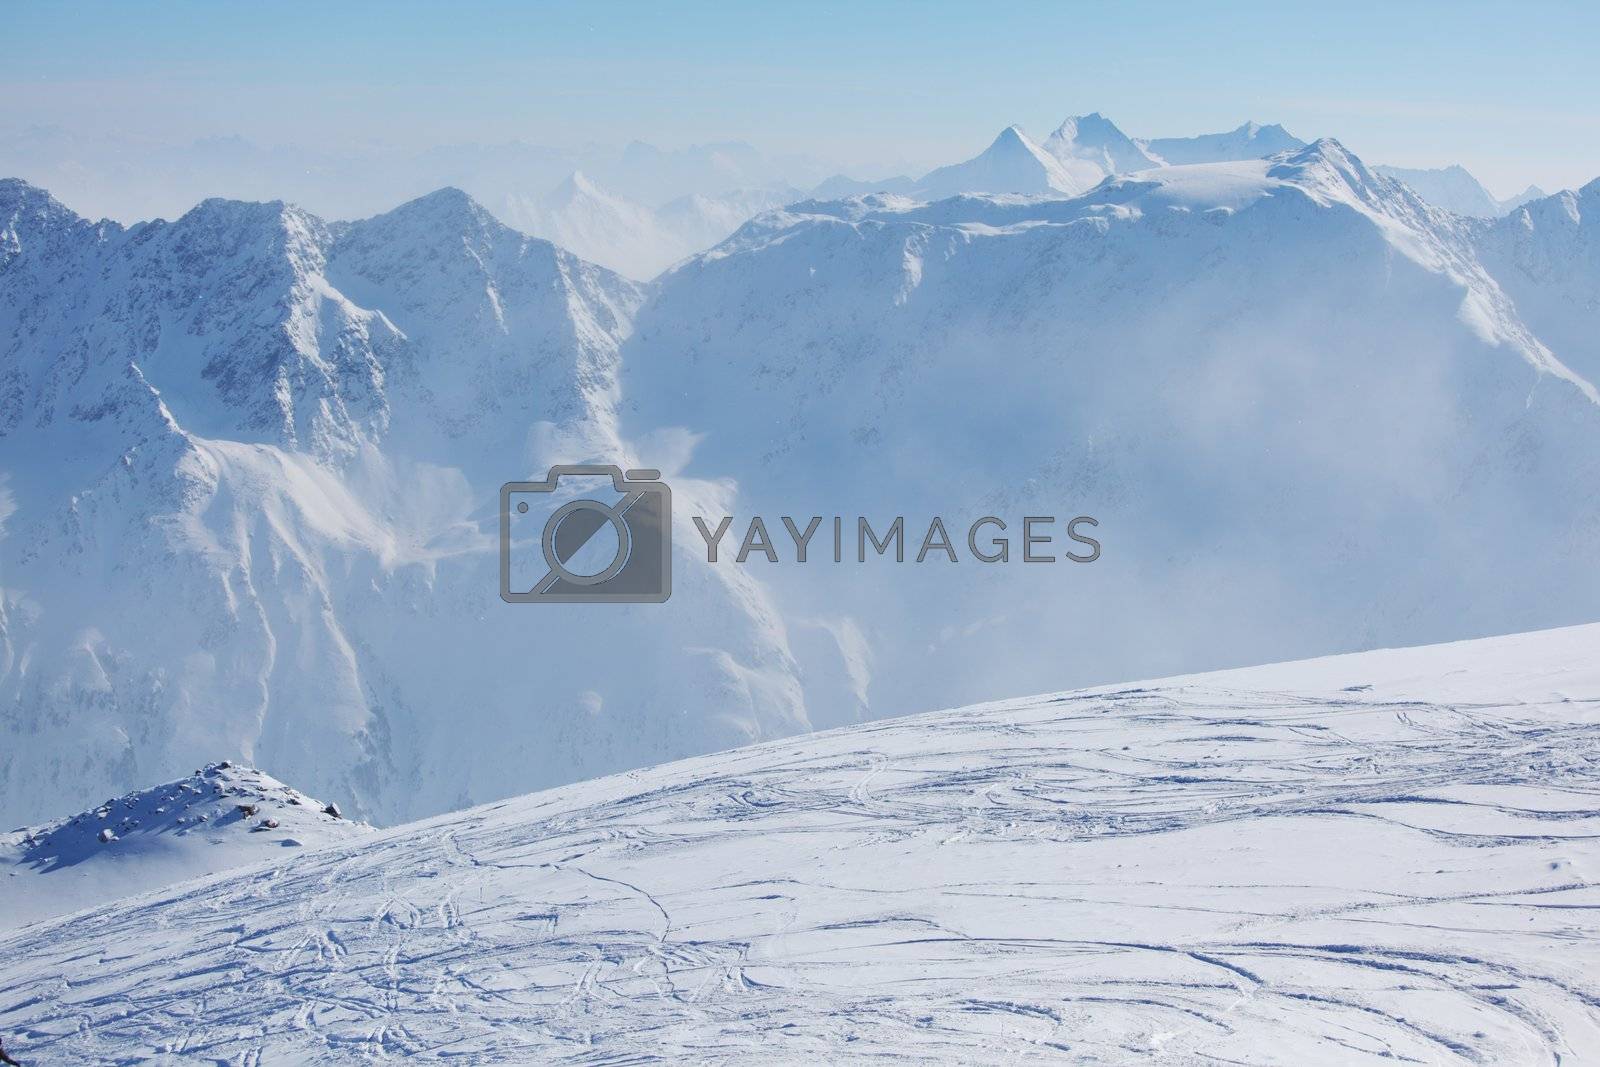 Royalty free image of top of alps by Yellowj